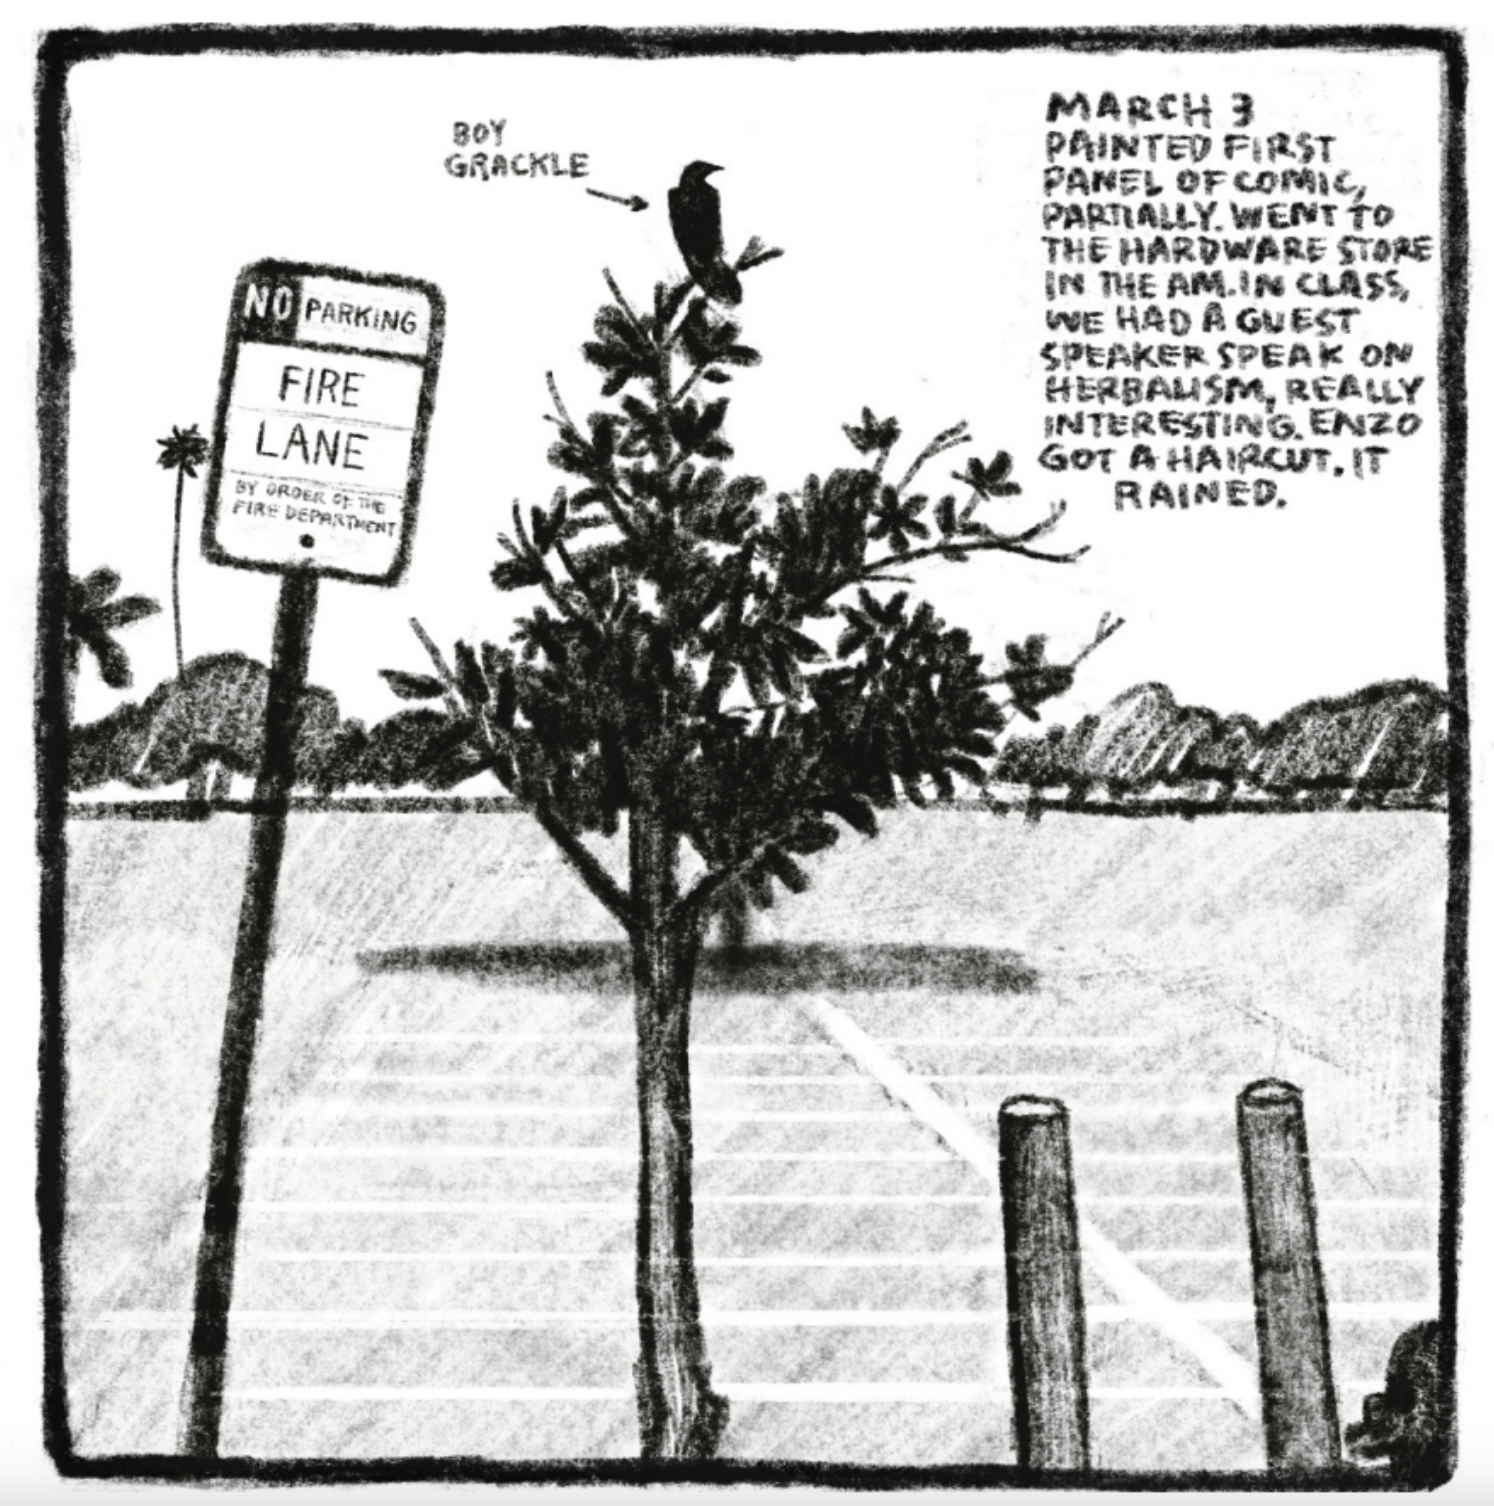 Panel 3
A boy grackle (identified explicitly with an arrow) sits atop a tree next to a "no parking / fire lane" sign.
Upper right corner reads: "MARCH 3
PAINTED FIRST PANEL OF COMIC, PARTIALLY. WENT TO THE HARDWARE STORE IN THE A.M. IN CLASS, WE HAD A GUEST SPEAKER SPEAK ON HERBALISM, REALLY INTERESTING. ENZO GOT A HAIRCUT. IT RAINED."